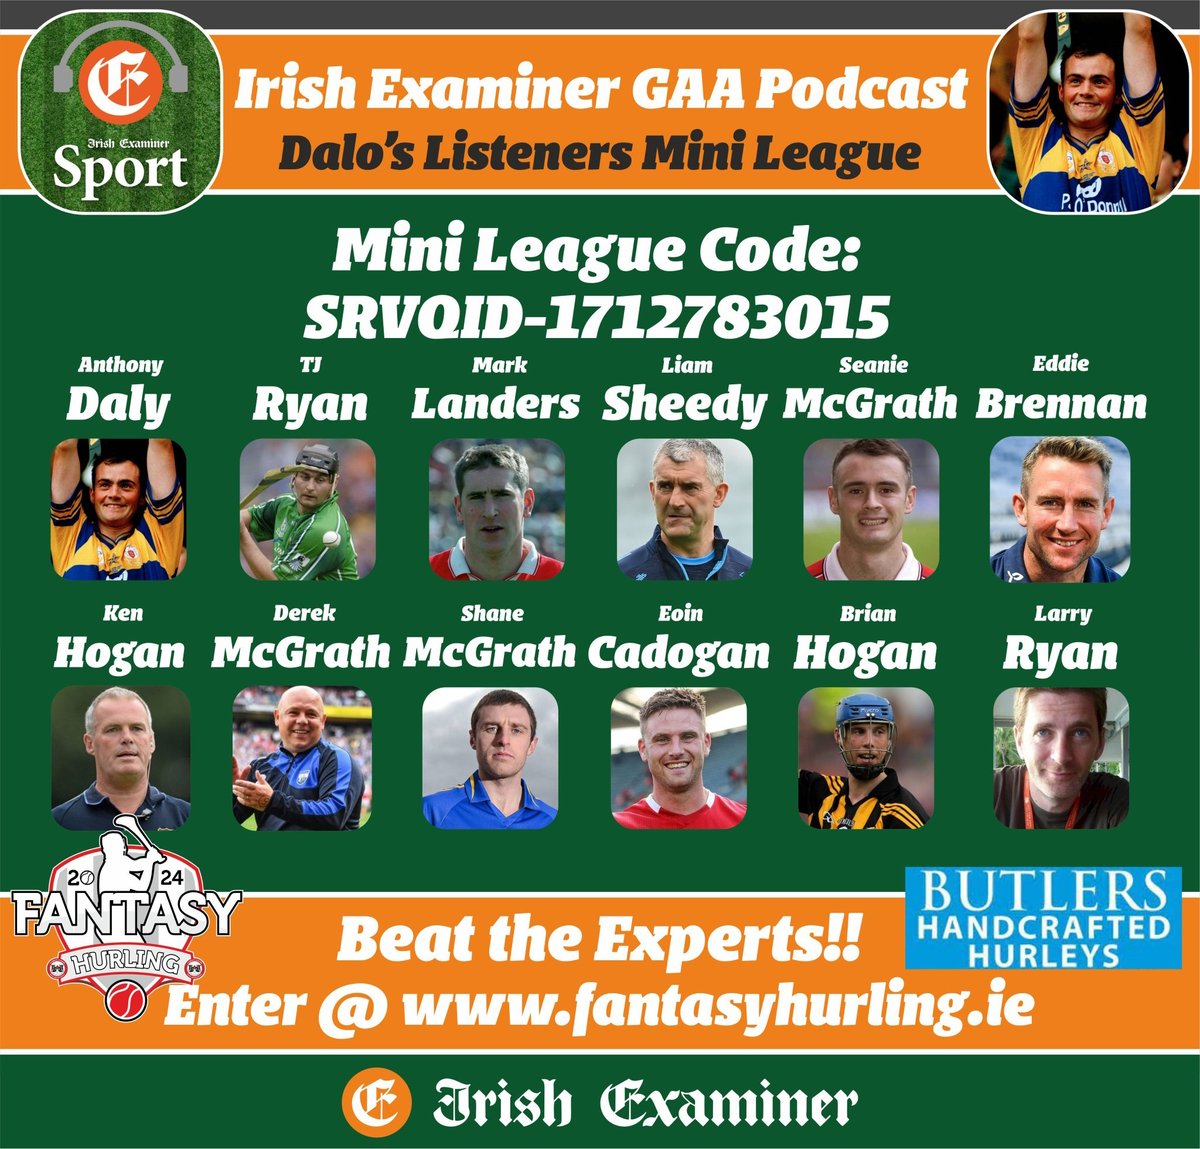 Get your last AvB 15v15 played before Championship throws in with the @daloanto @examinersport @FantasyHurling Listeners League. CODE: SRVQID-1712783015. Thanks again to @ButlersHurleys for generously supplying the prize.